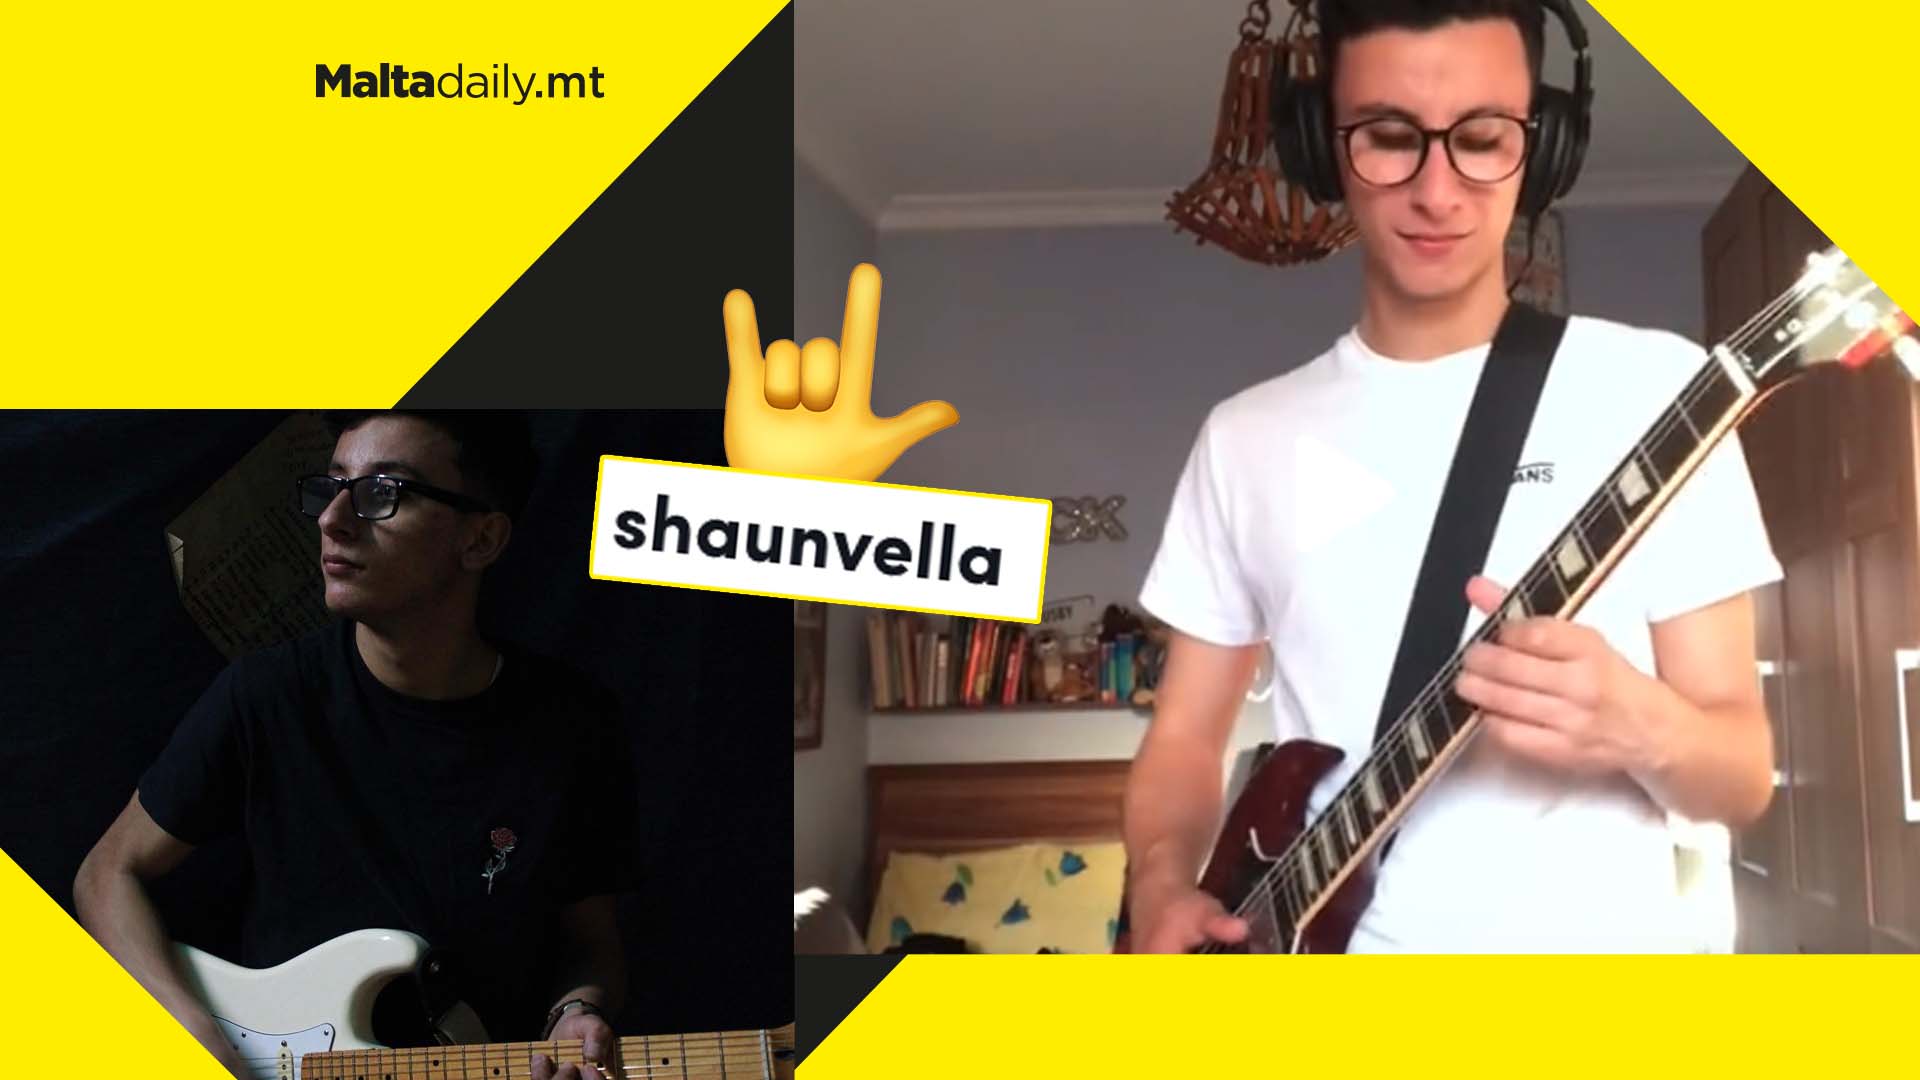 Young local guitarist Shaun Vella racking views with solo covers